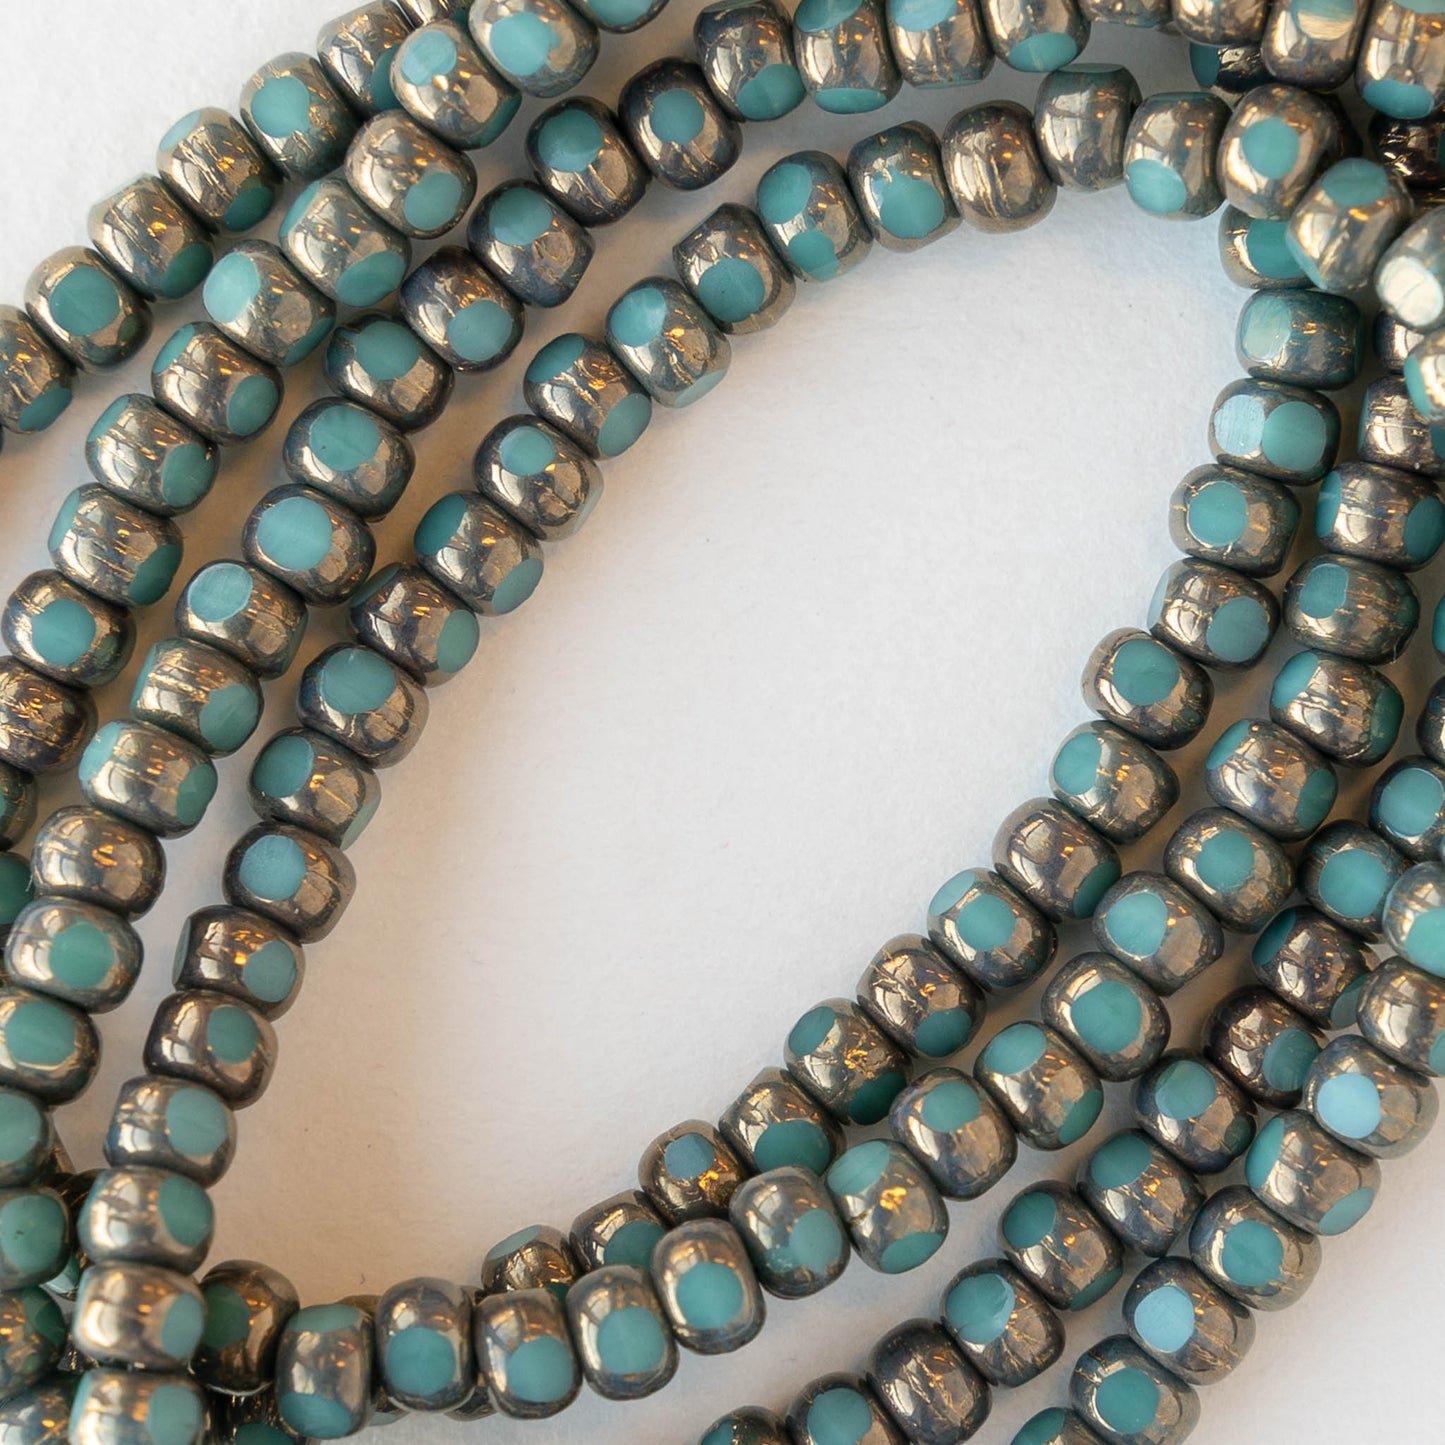 6/0 Tri-cut Seed Beads - Opaque Turquoise with Bronze Finish - 50